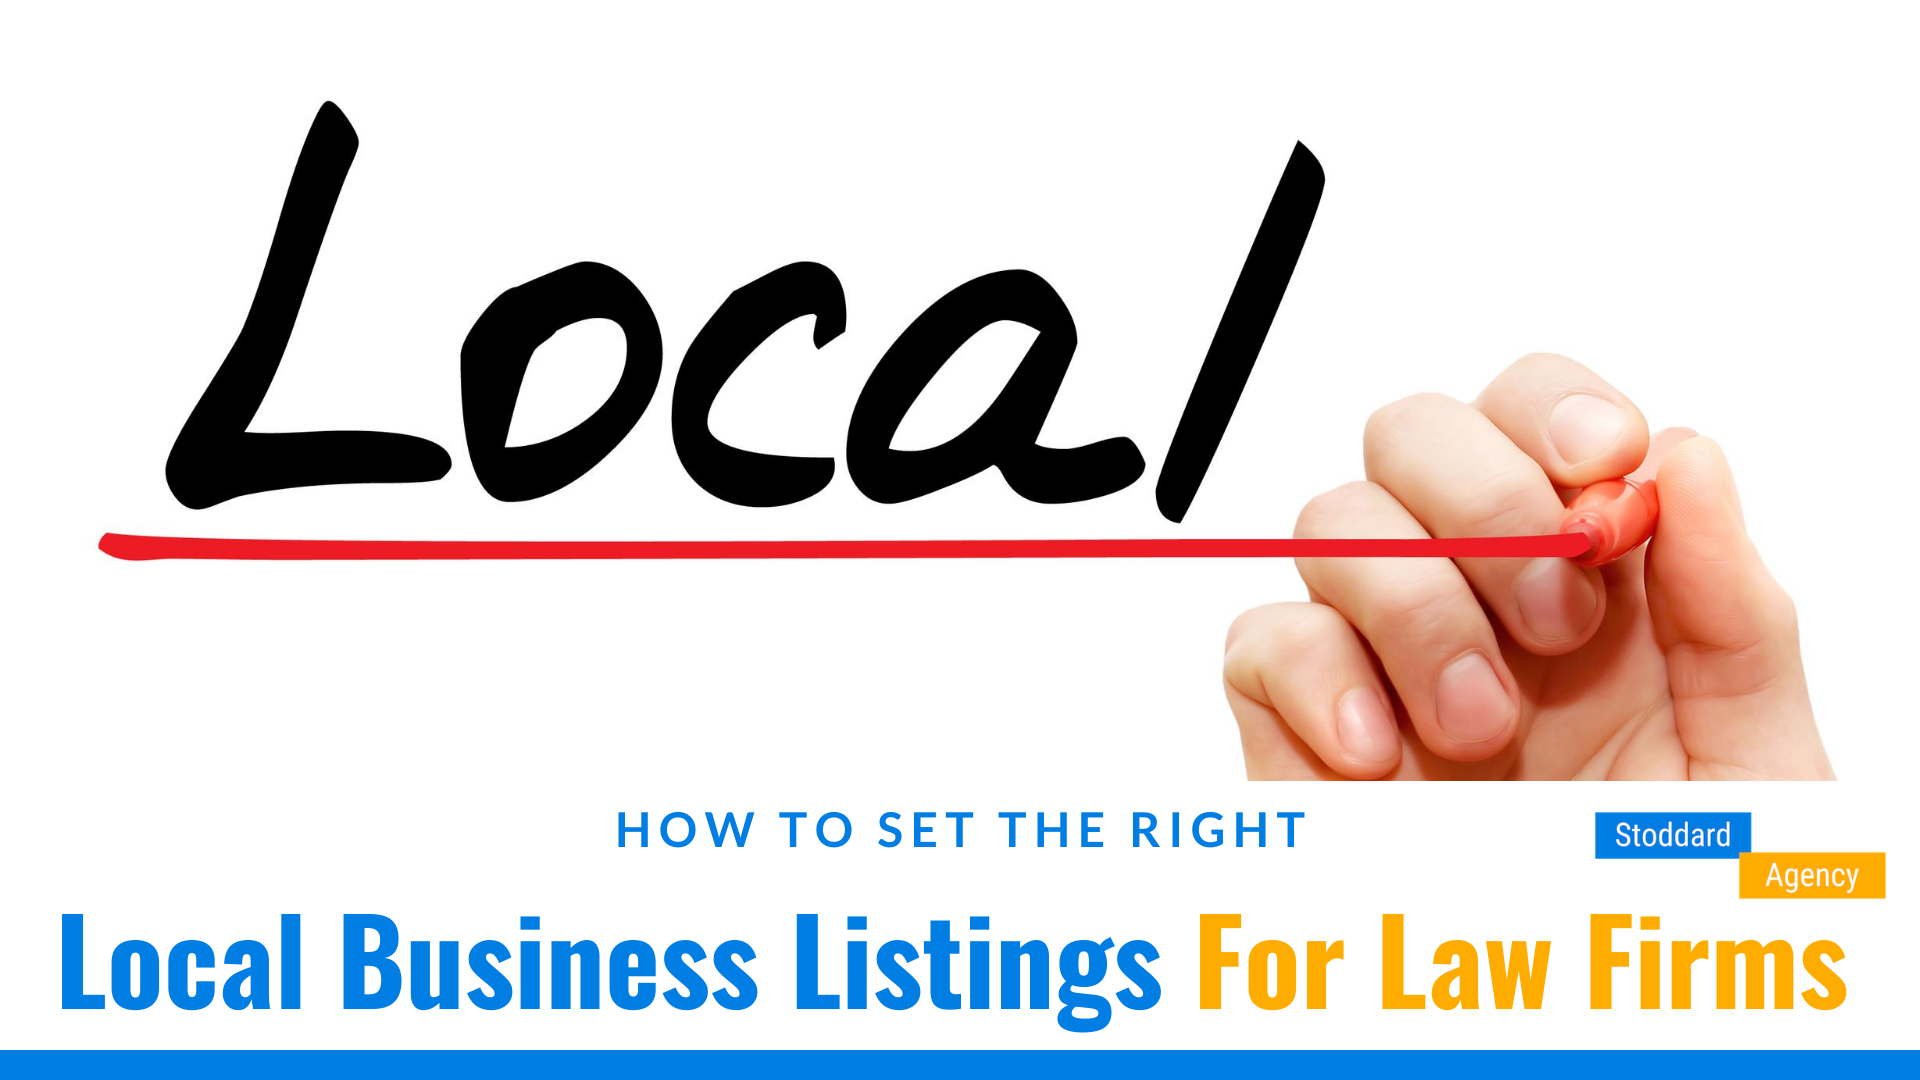 Local Business Listings for Law Firms